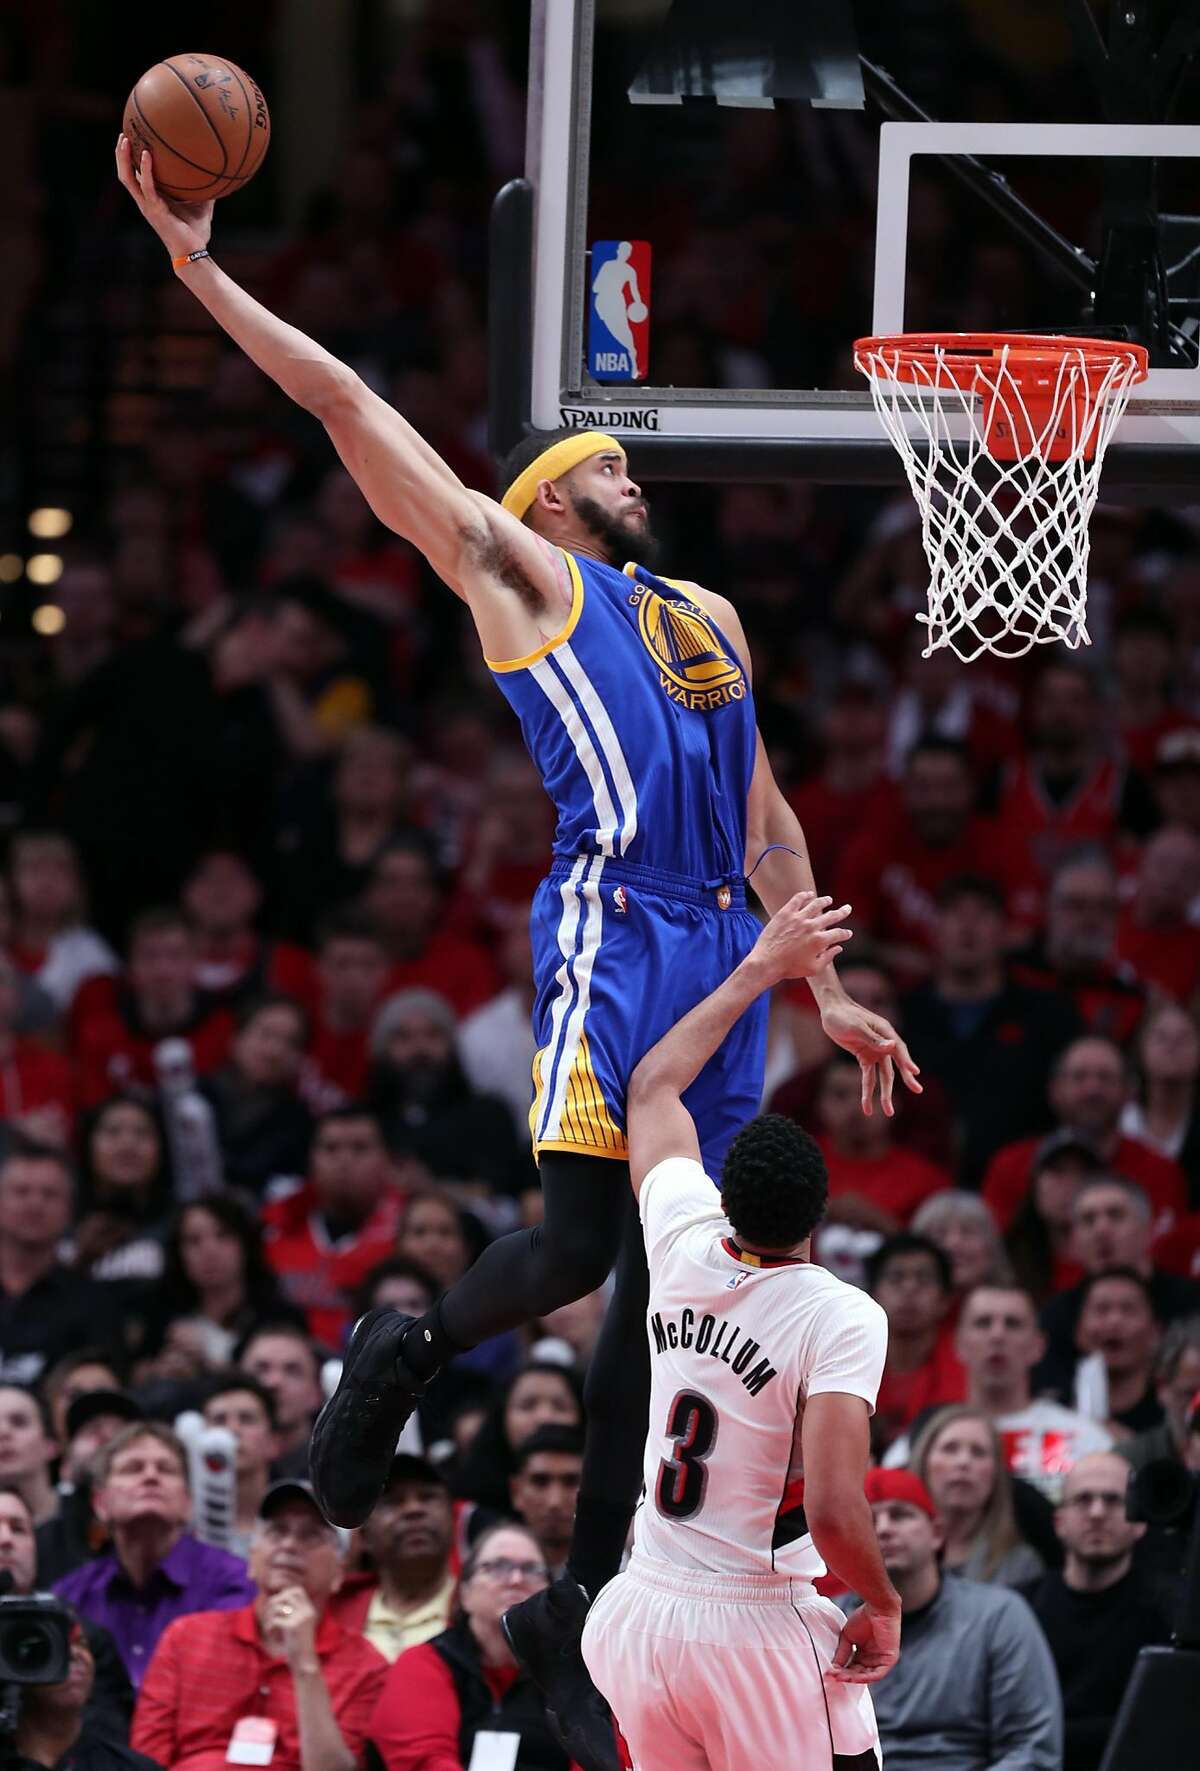 Golden State Warriors' JaVale McGee dunks in 3rd quarter against Portland Trail Blazers' C.J. McCollum in Game 3 of NBA Western Conference 1st Round Playoffs at Moda Center in Portland, Oregon on Saturday, April 22, 2017.